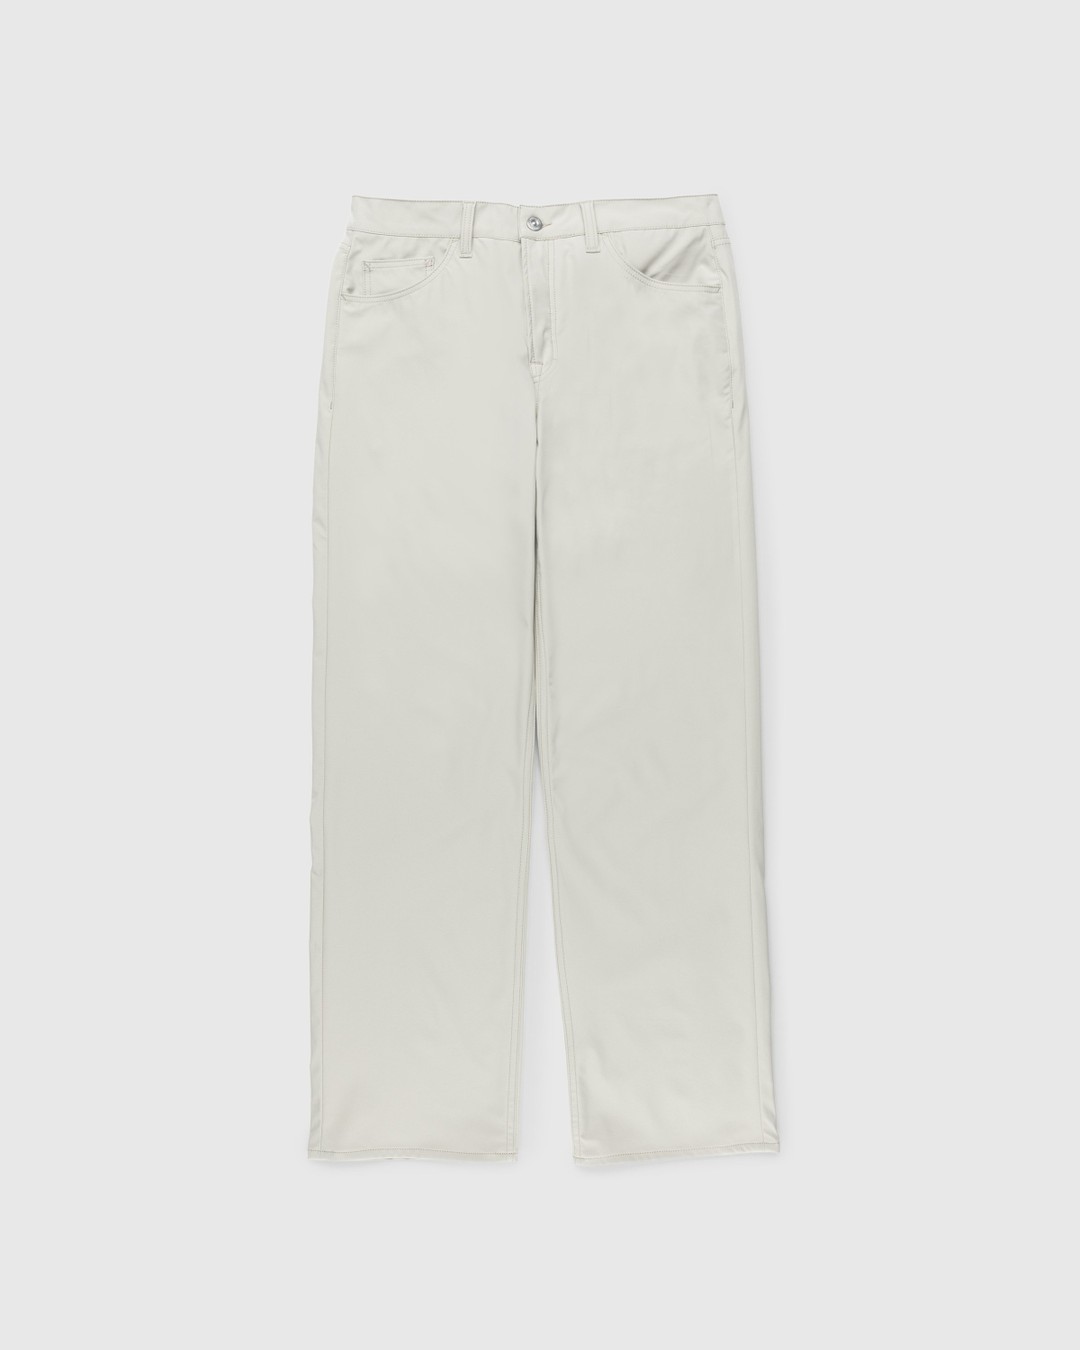 Our Legacy – Formal Cut Dusty White Muted Scuba - Pants - Beige - Image 1